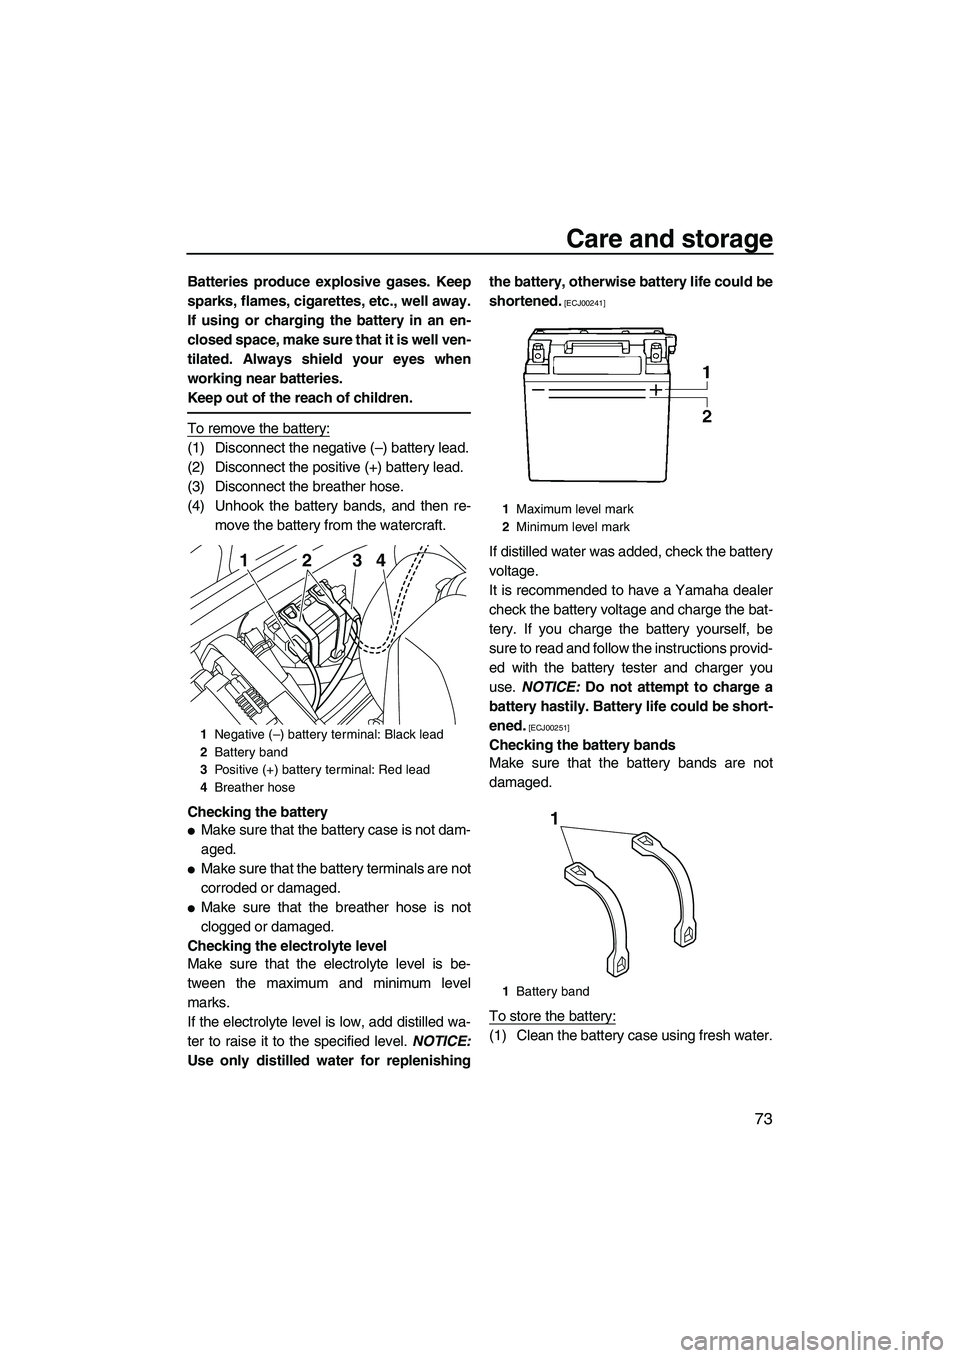 YAMAHA VXS 2012  Owners Manual Care and storage
73
Batteries produce explosive gases. Keep
sparks, flames, cigarettes, etc., well away.
If using or charging the battery in an en-
closed space, make sure that it is well ven-
tilated